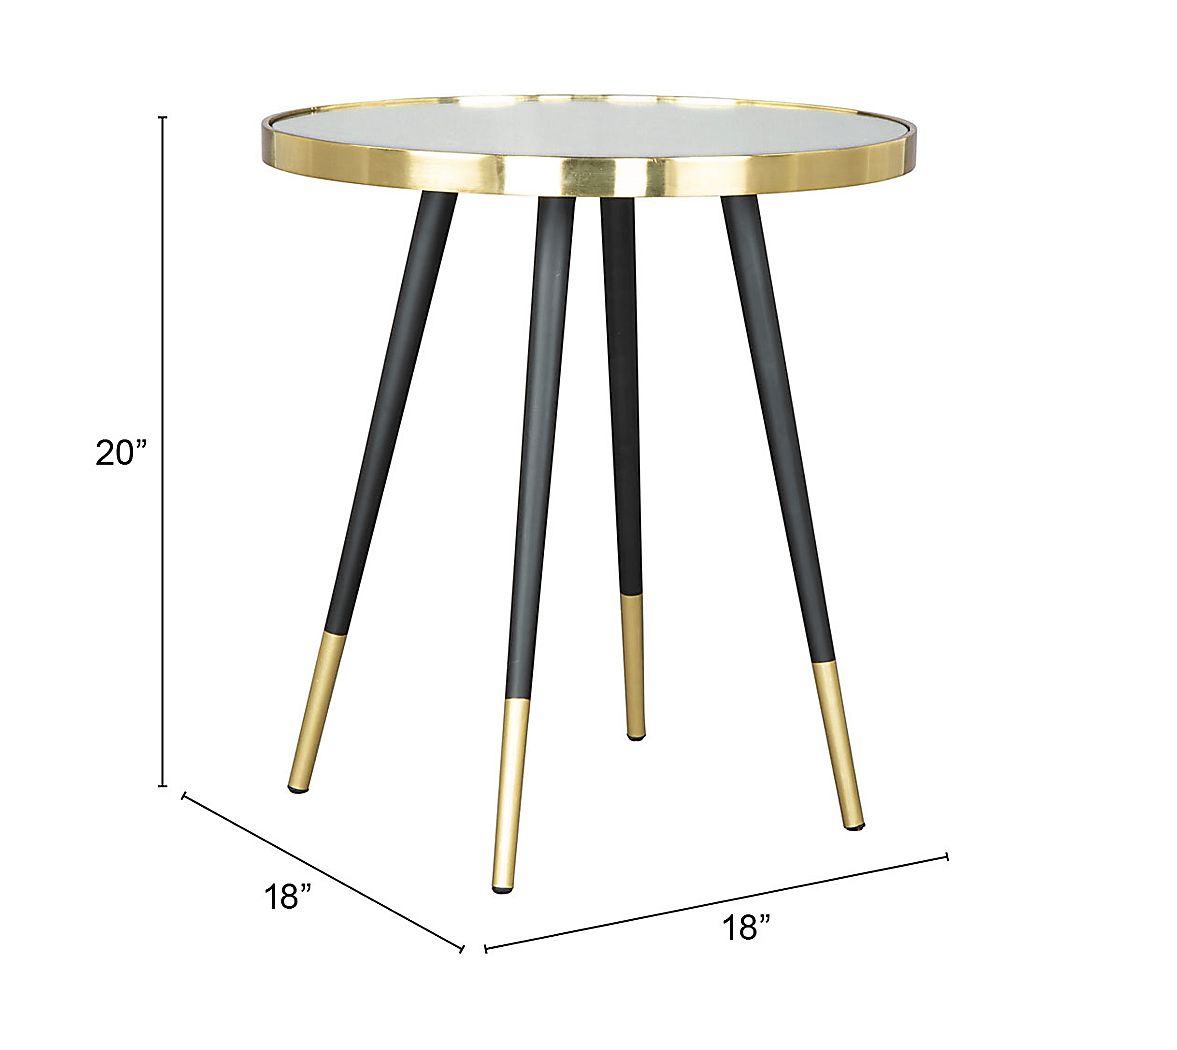 Cedrus Gold End Table